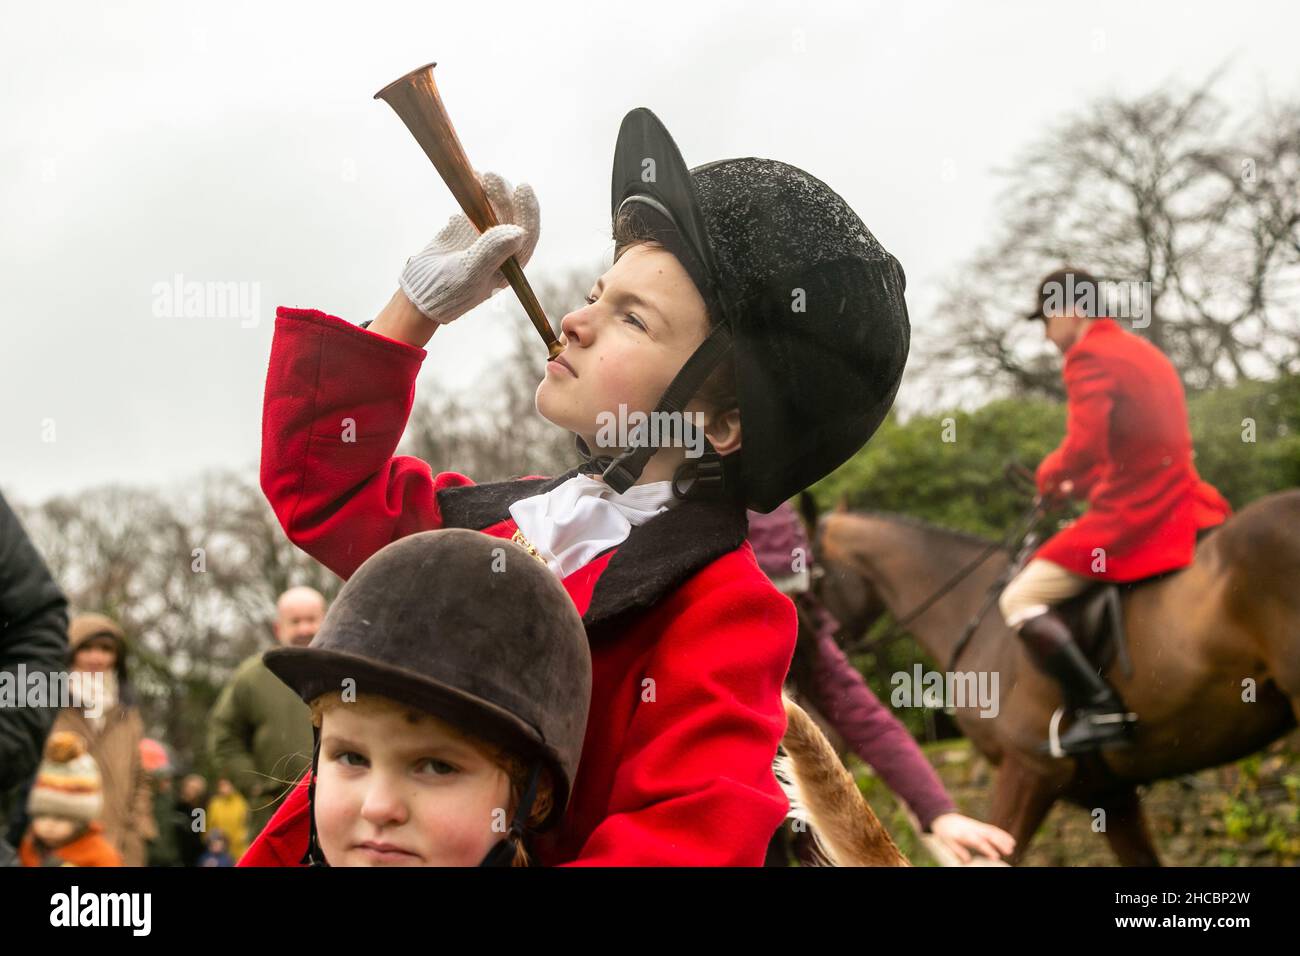 Hagley, Worcestershire, UK. 27th Dec, 2021. 8-year-old Henley Mills with his horn at the first Albrighton and Woodland Hunt meet at Hagley Hall since the Coronavirus pandemic. The Albrighton and Woodland Hunt meet annually at Hagley Hall in Worcestershire. Credit: Peter Lopeman/Alamy Live News Stock Photo